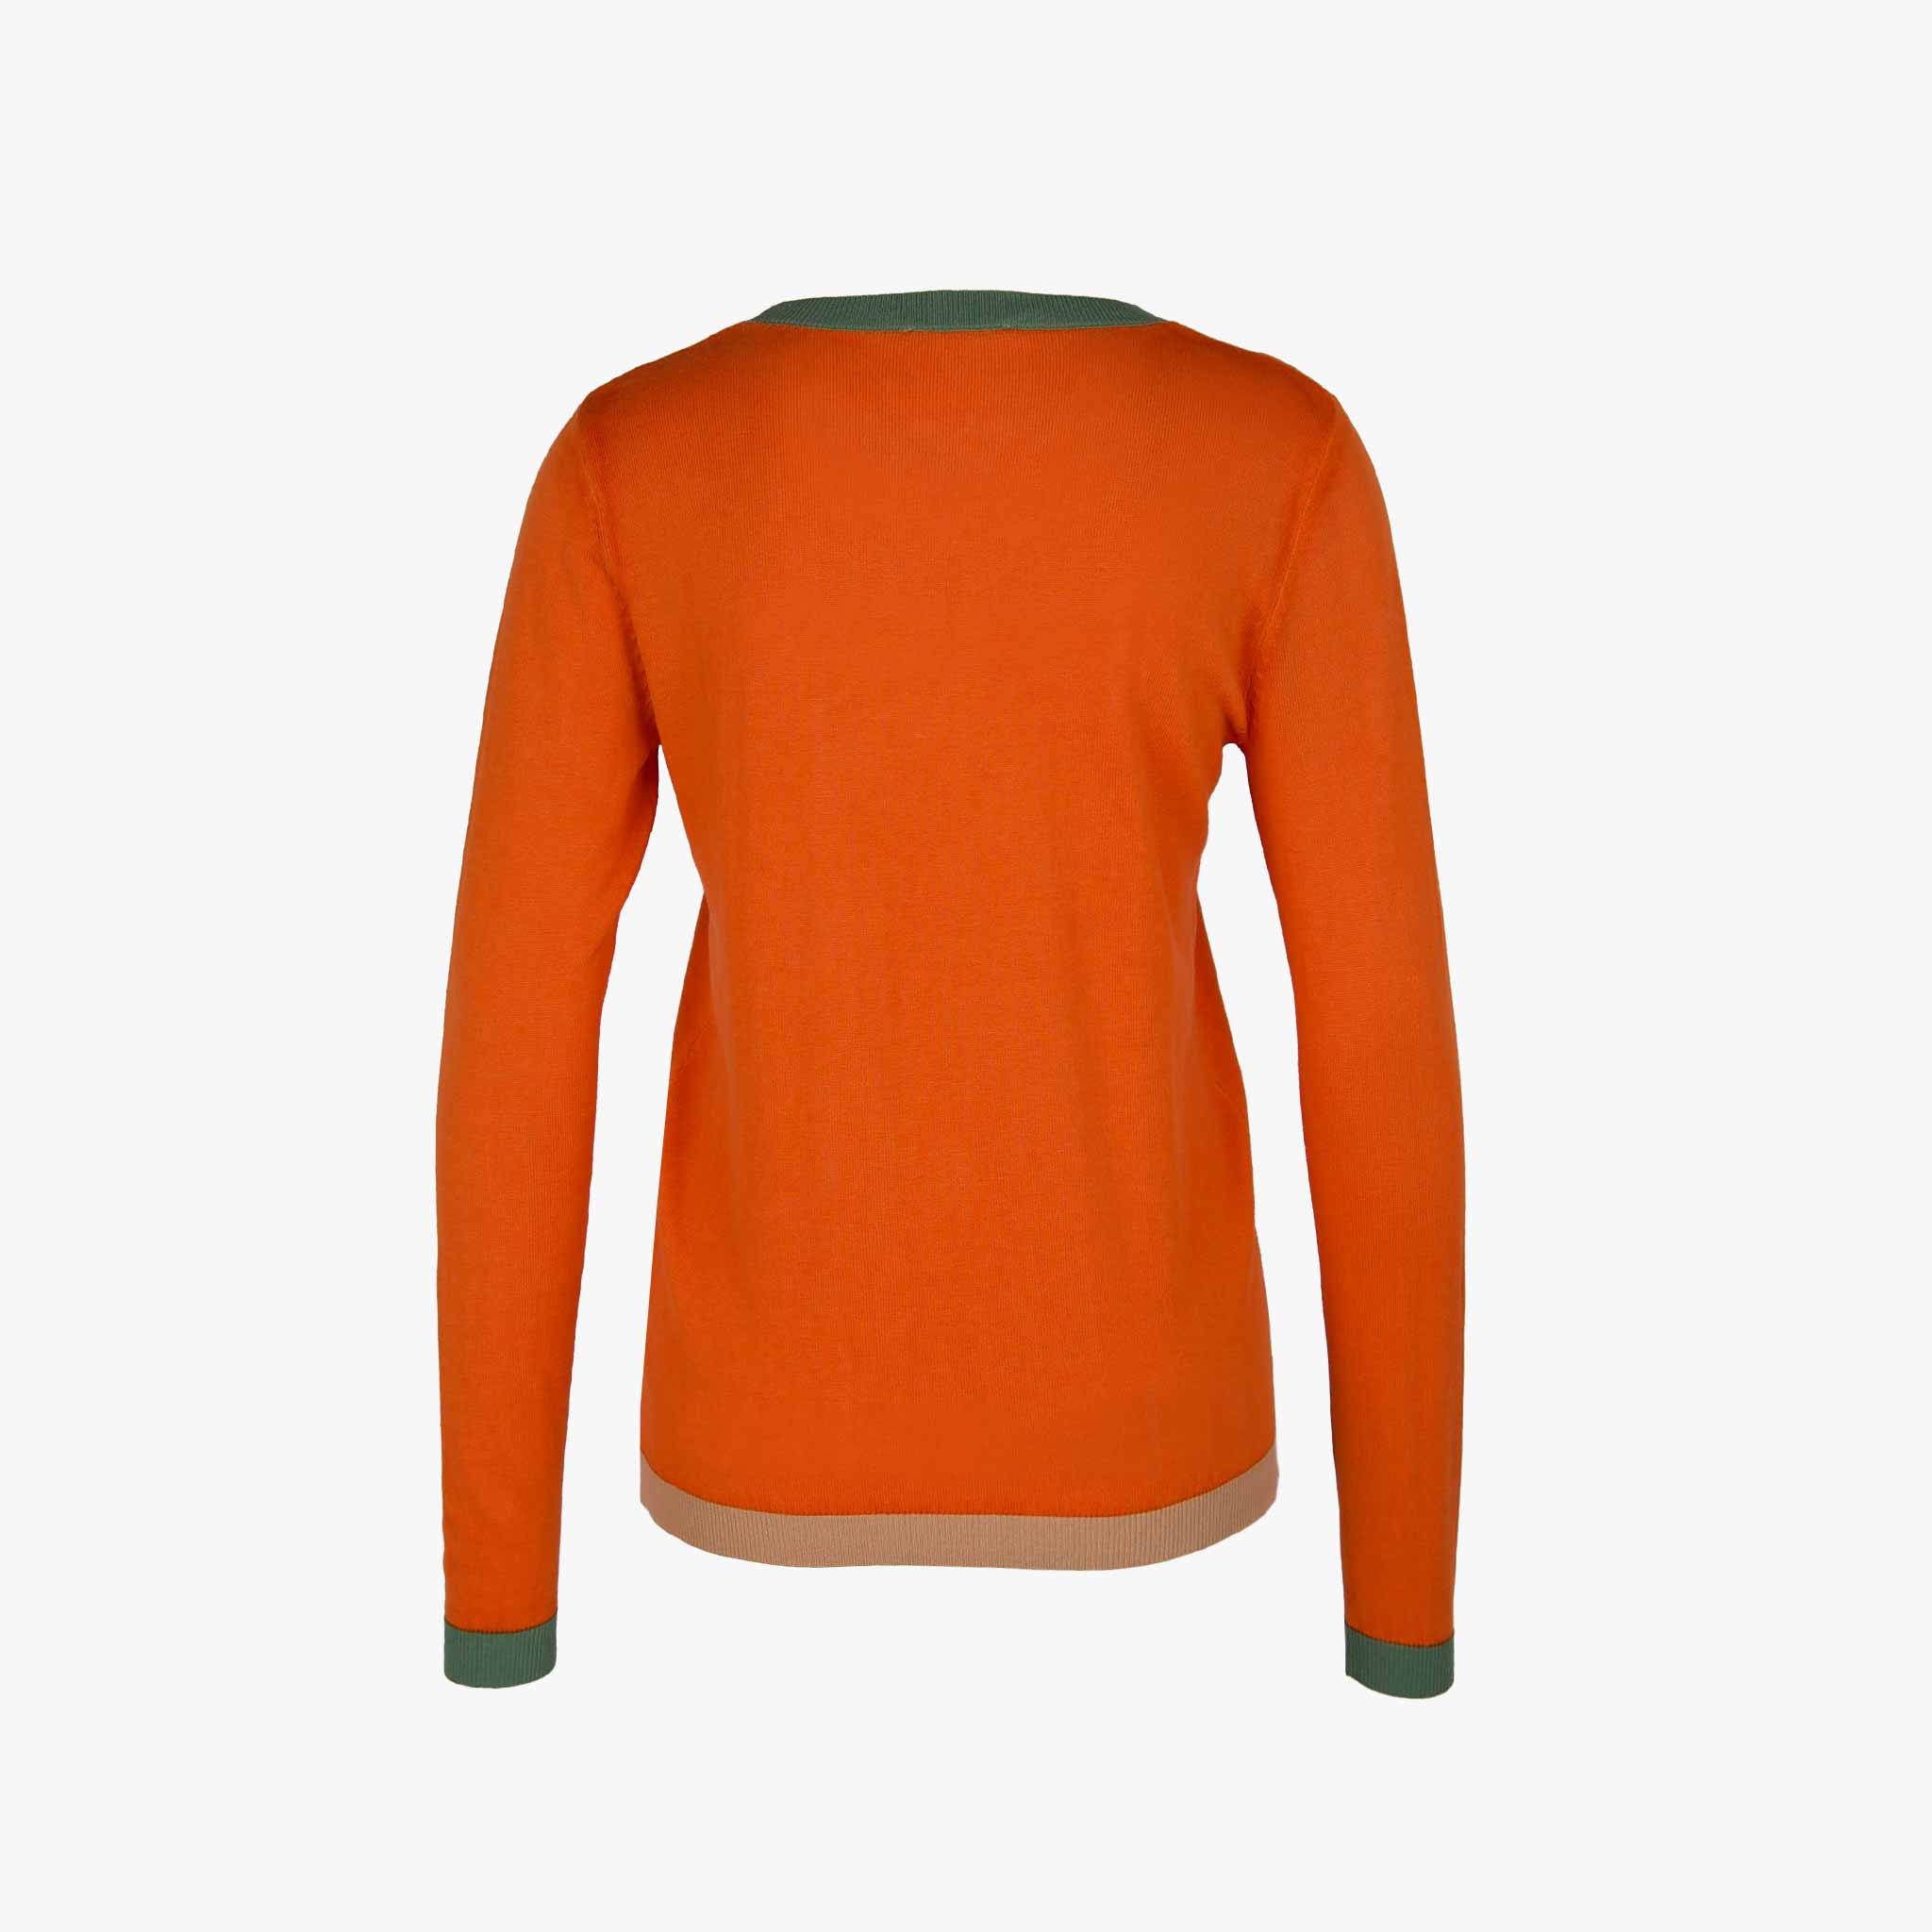 In bed with yOu Pulli uni | orange